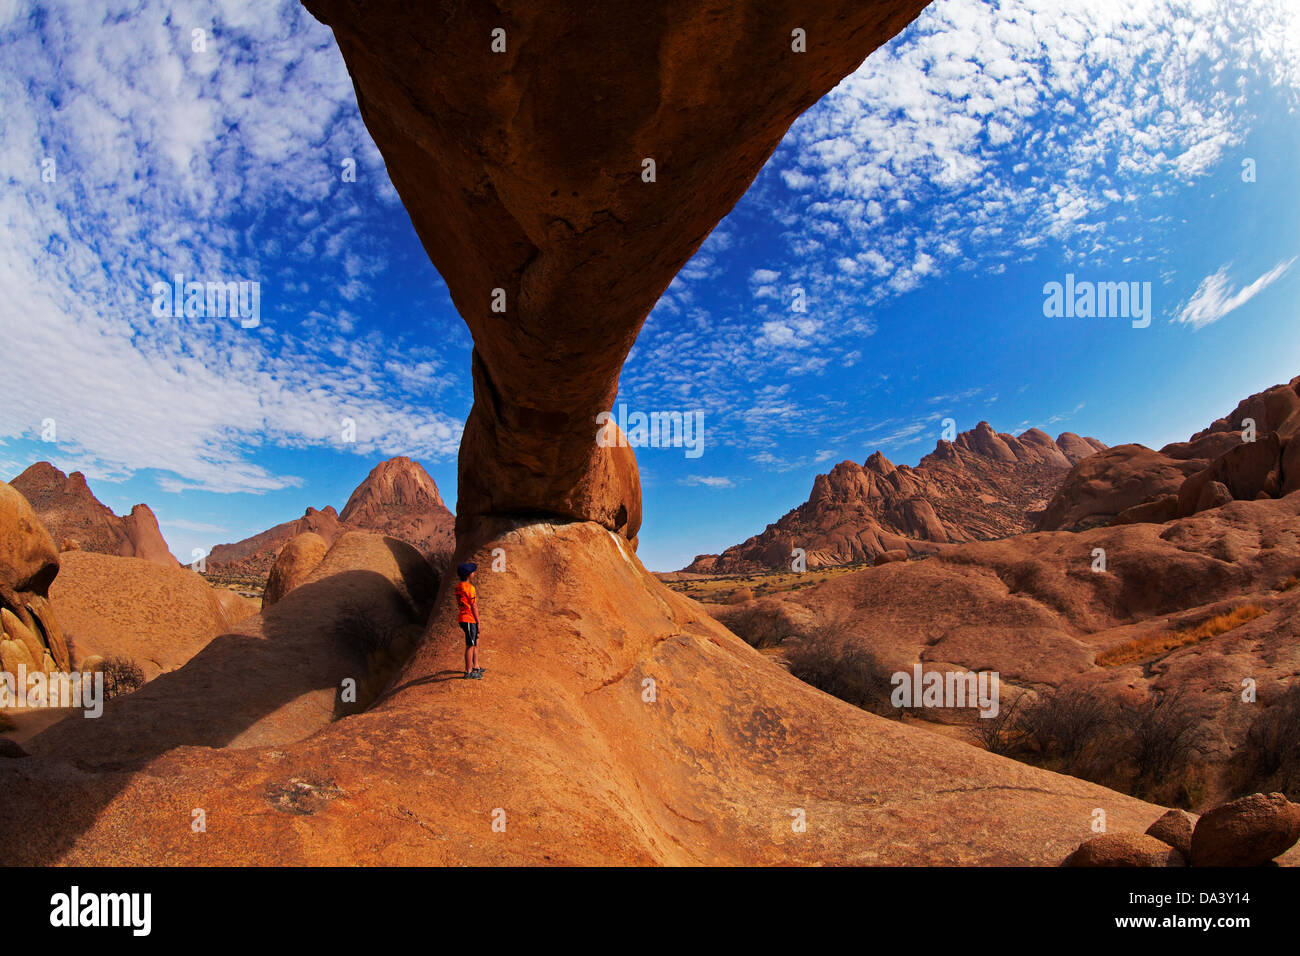 Boy under natural rock arch at Spitzkoppe (left), and Pondok Mountains in distance (right), Namibia, Africa Stock Photo